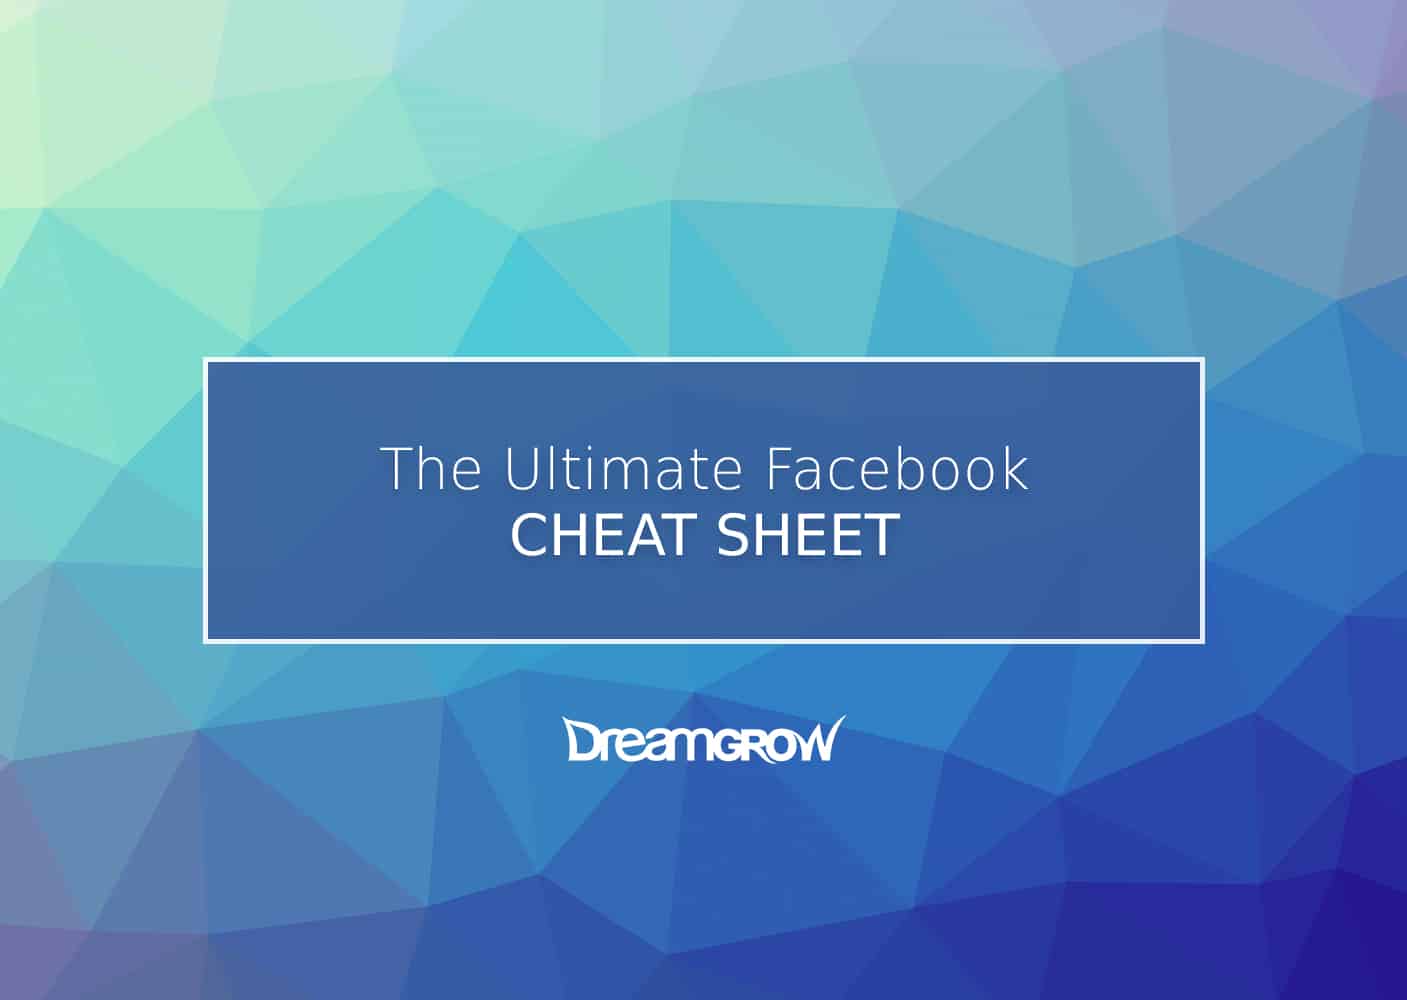 Facebook Cheat Sheet All Sizes And Dimensions 2018 DreamGrow 2018